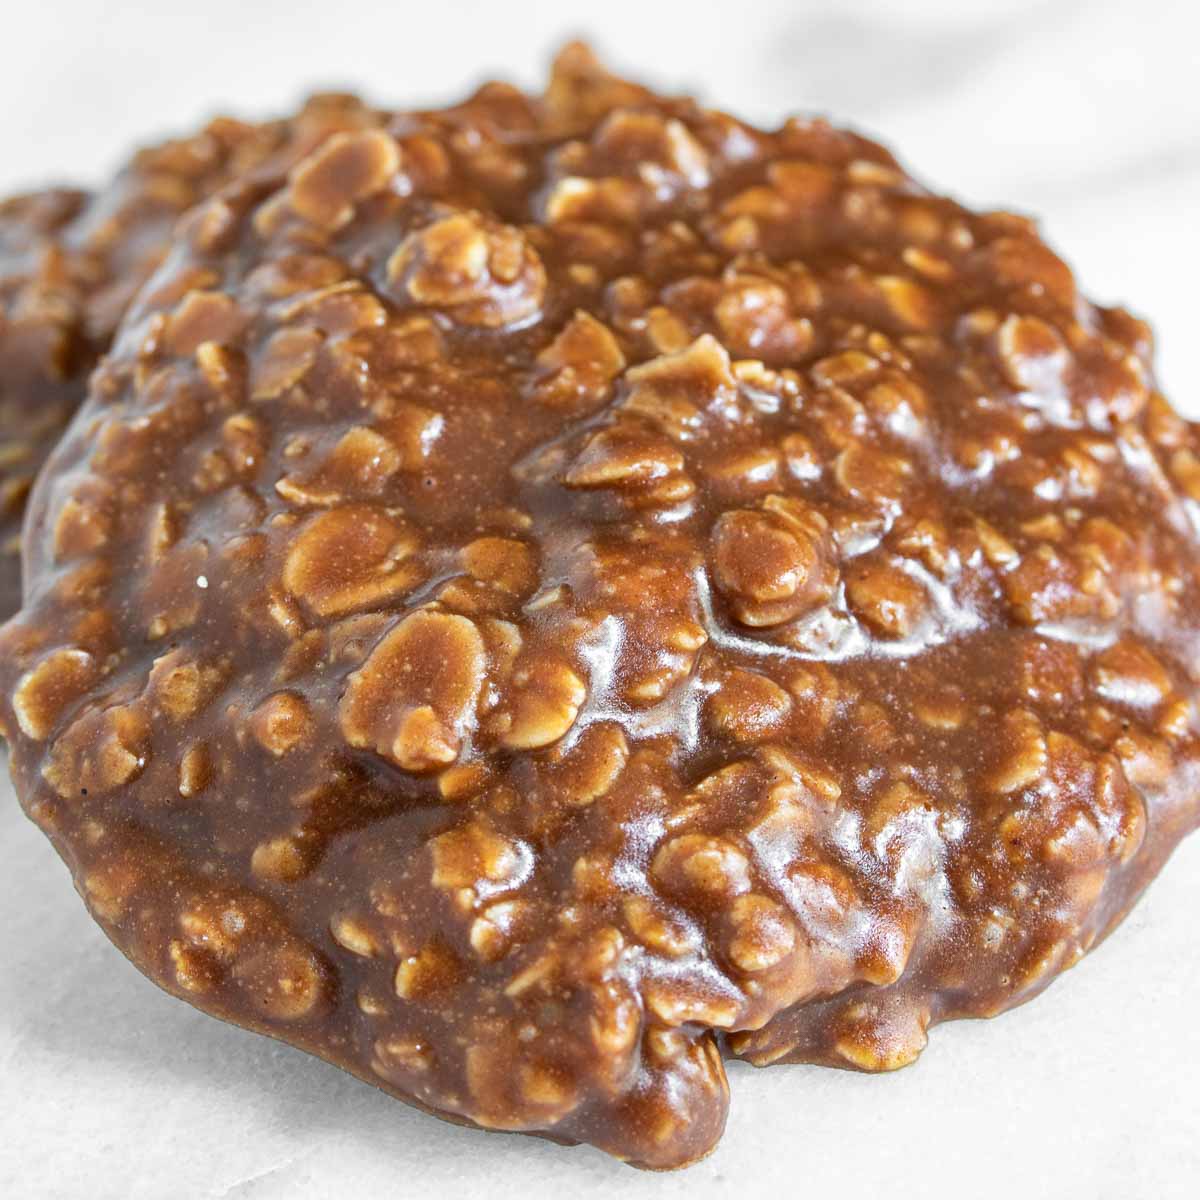 quick and easy No Bake Chocolate Oatmeal Cookies